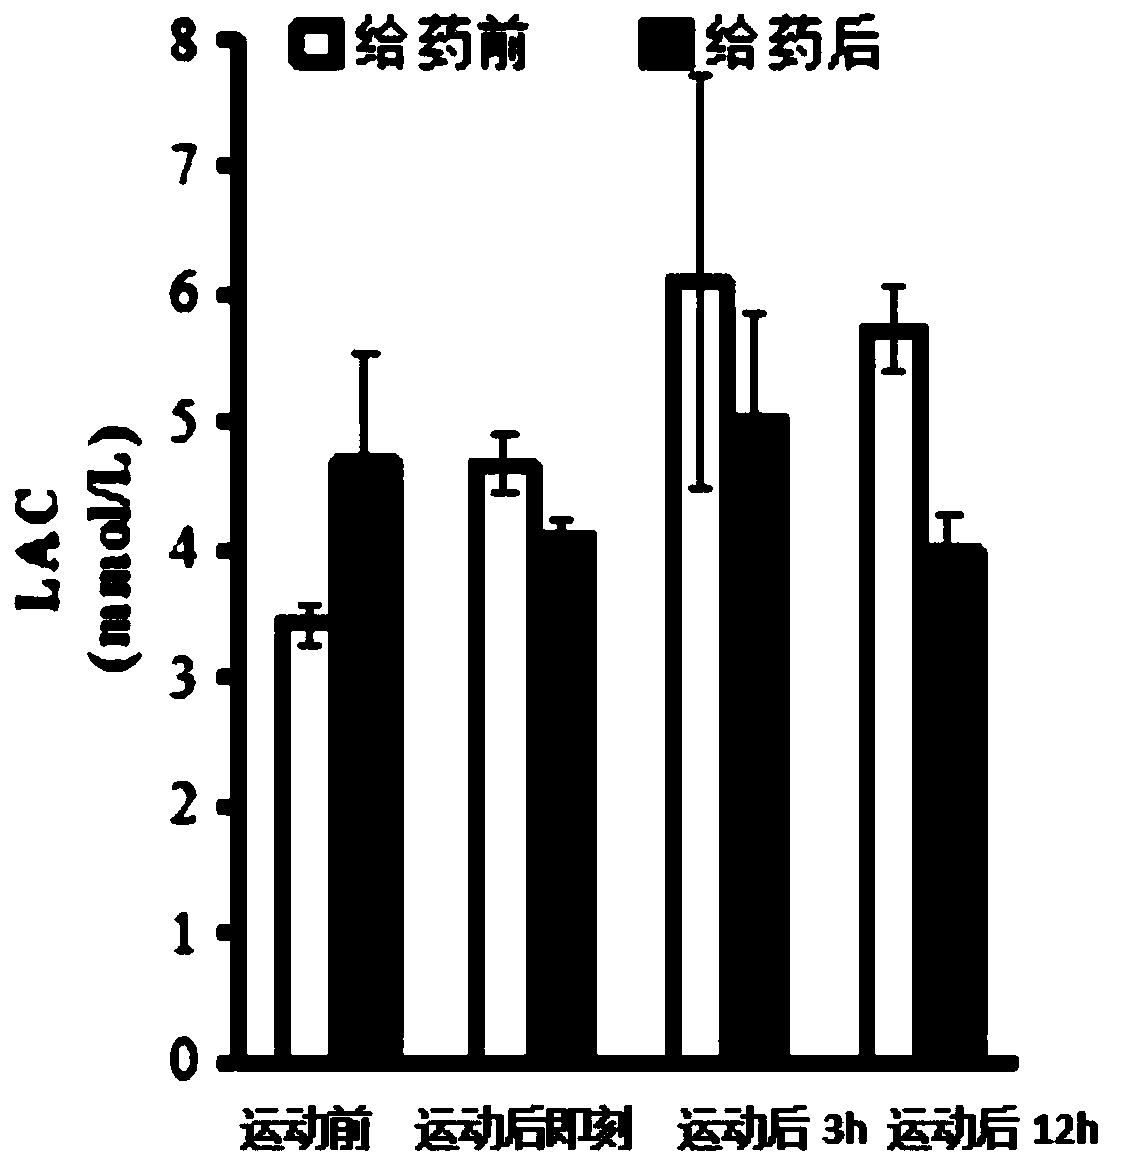 Prescription used for preparing Chinese herbal medicine capable of alleviating racehorse muscular soreness symptom, and application of prescription